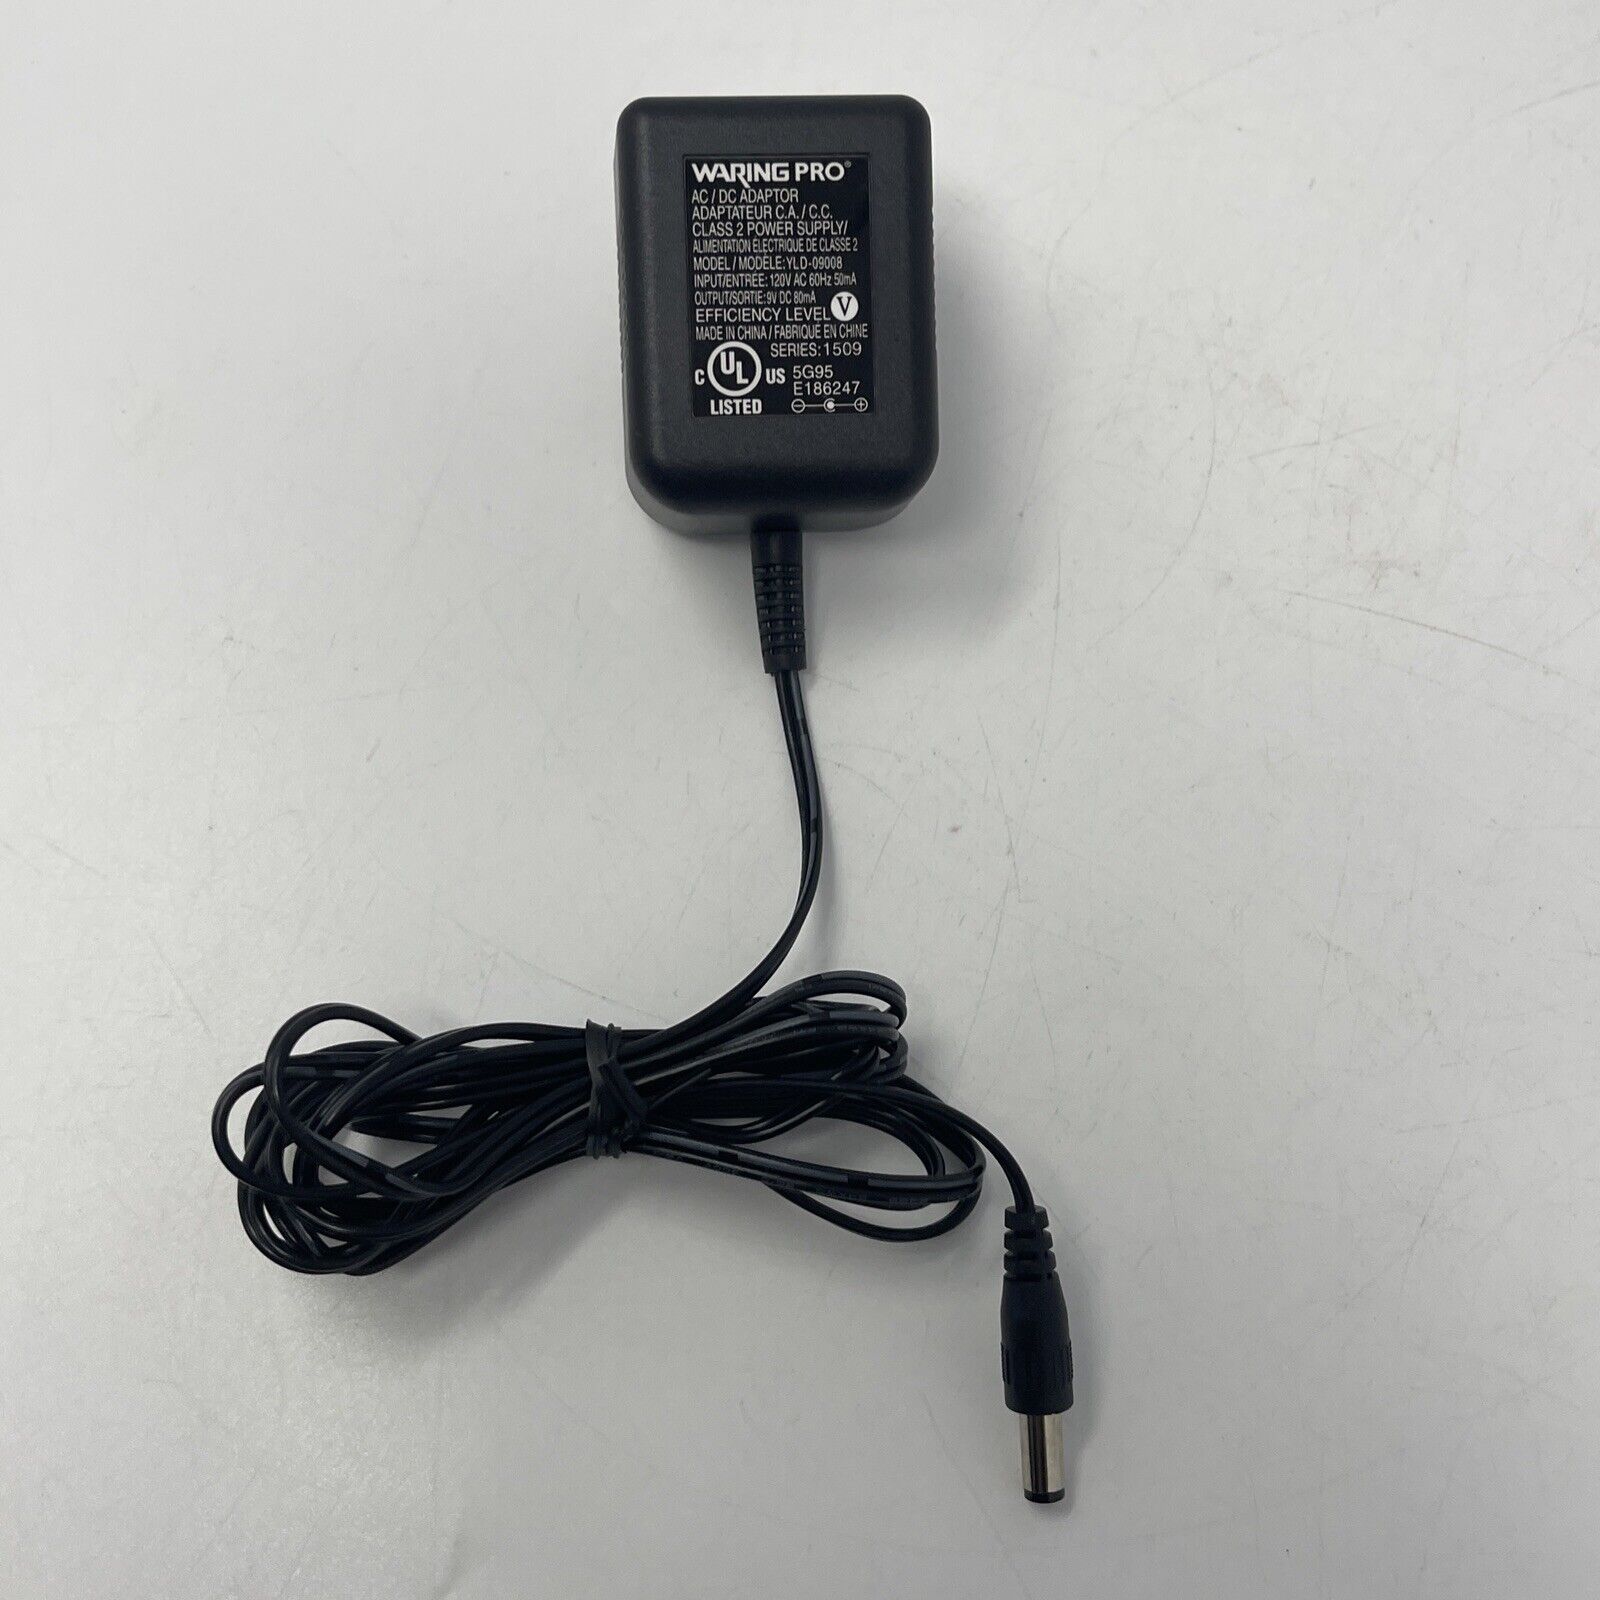 *Brand NEW*Waring Pro AC DC Adapter Power Supply YLD-09008 Series 1509 9V 80mA - Click Image to Close